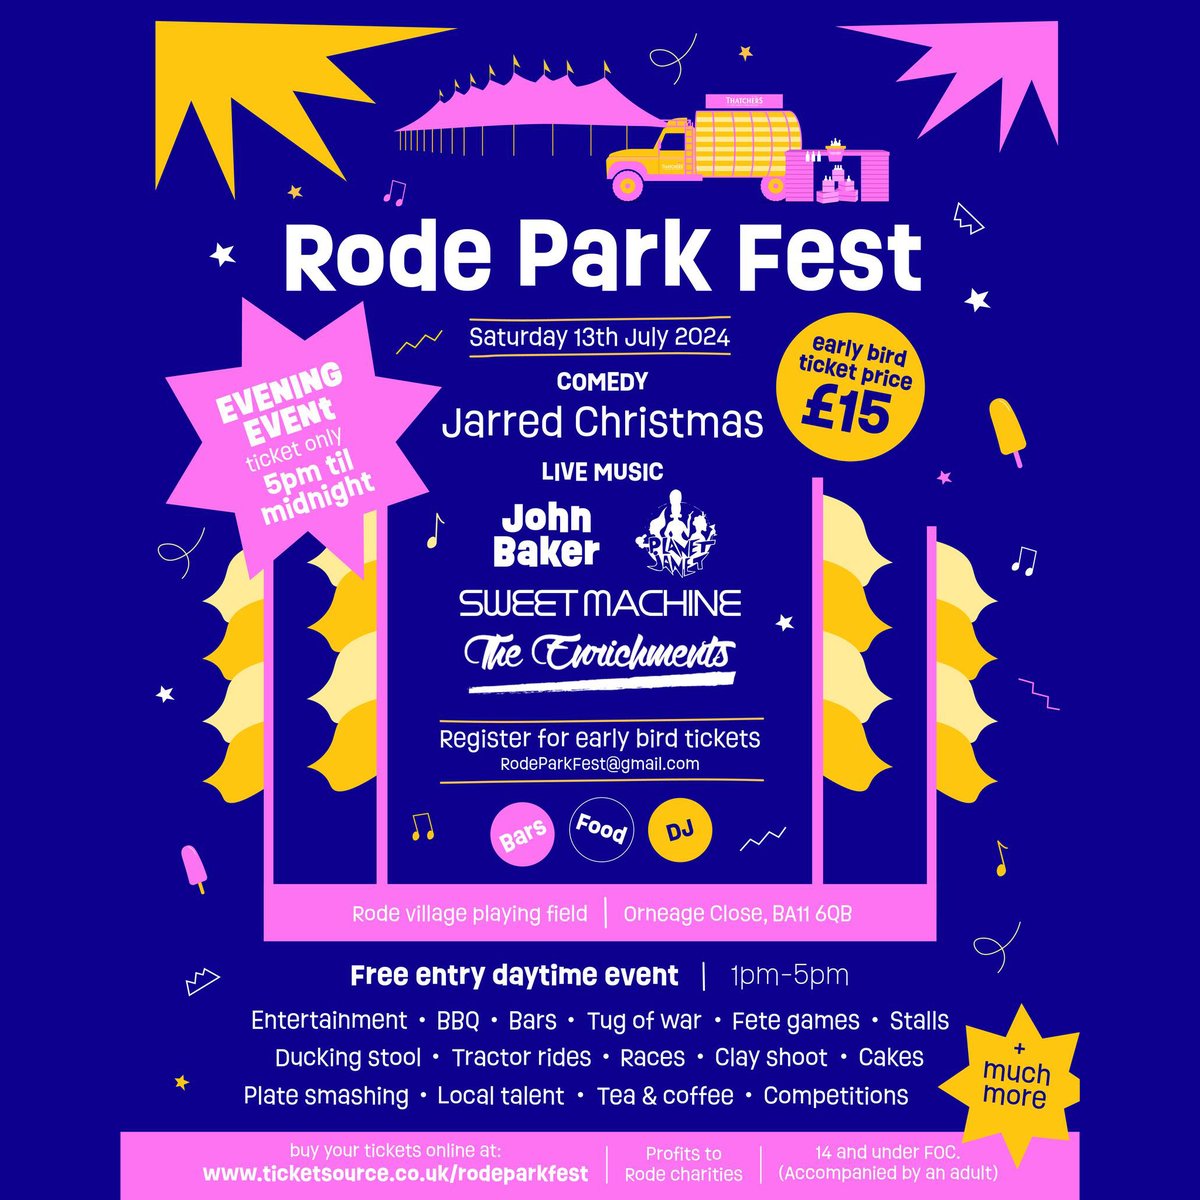 Excited to be on the line-up for this years Rode Park Fest Tickets at: ticketsource.co.uk/rodeparkfest #rodevillage #frome #somerset @fabulousfrome #local #village #festival #rode #snythpop #synthwave #electropop #80s